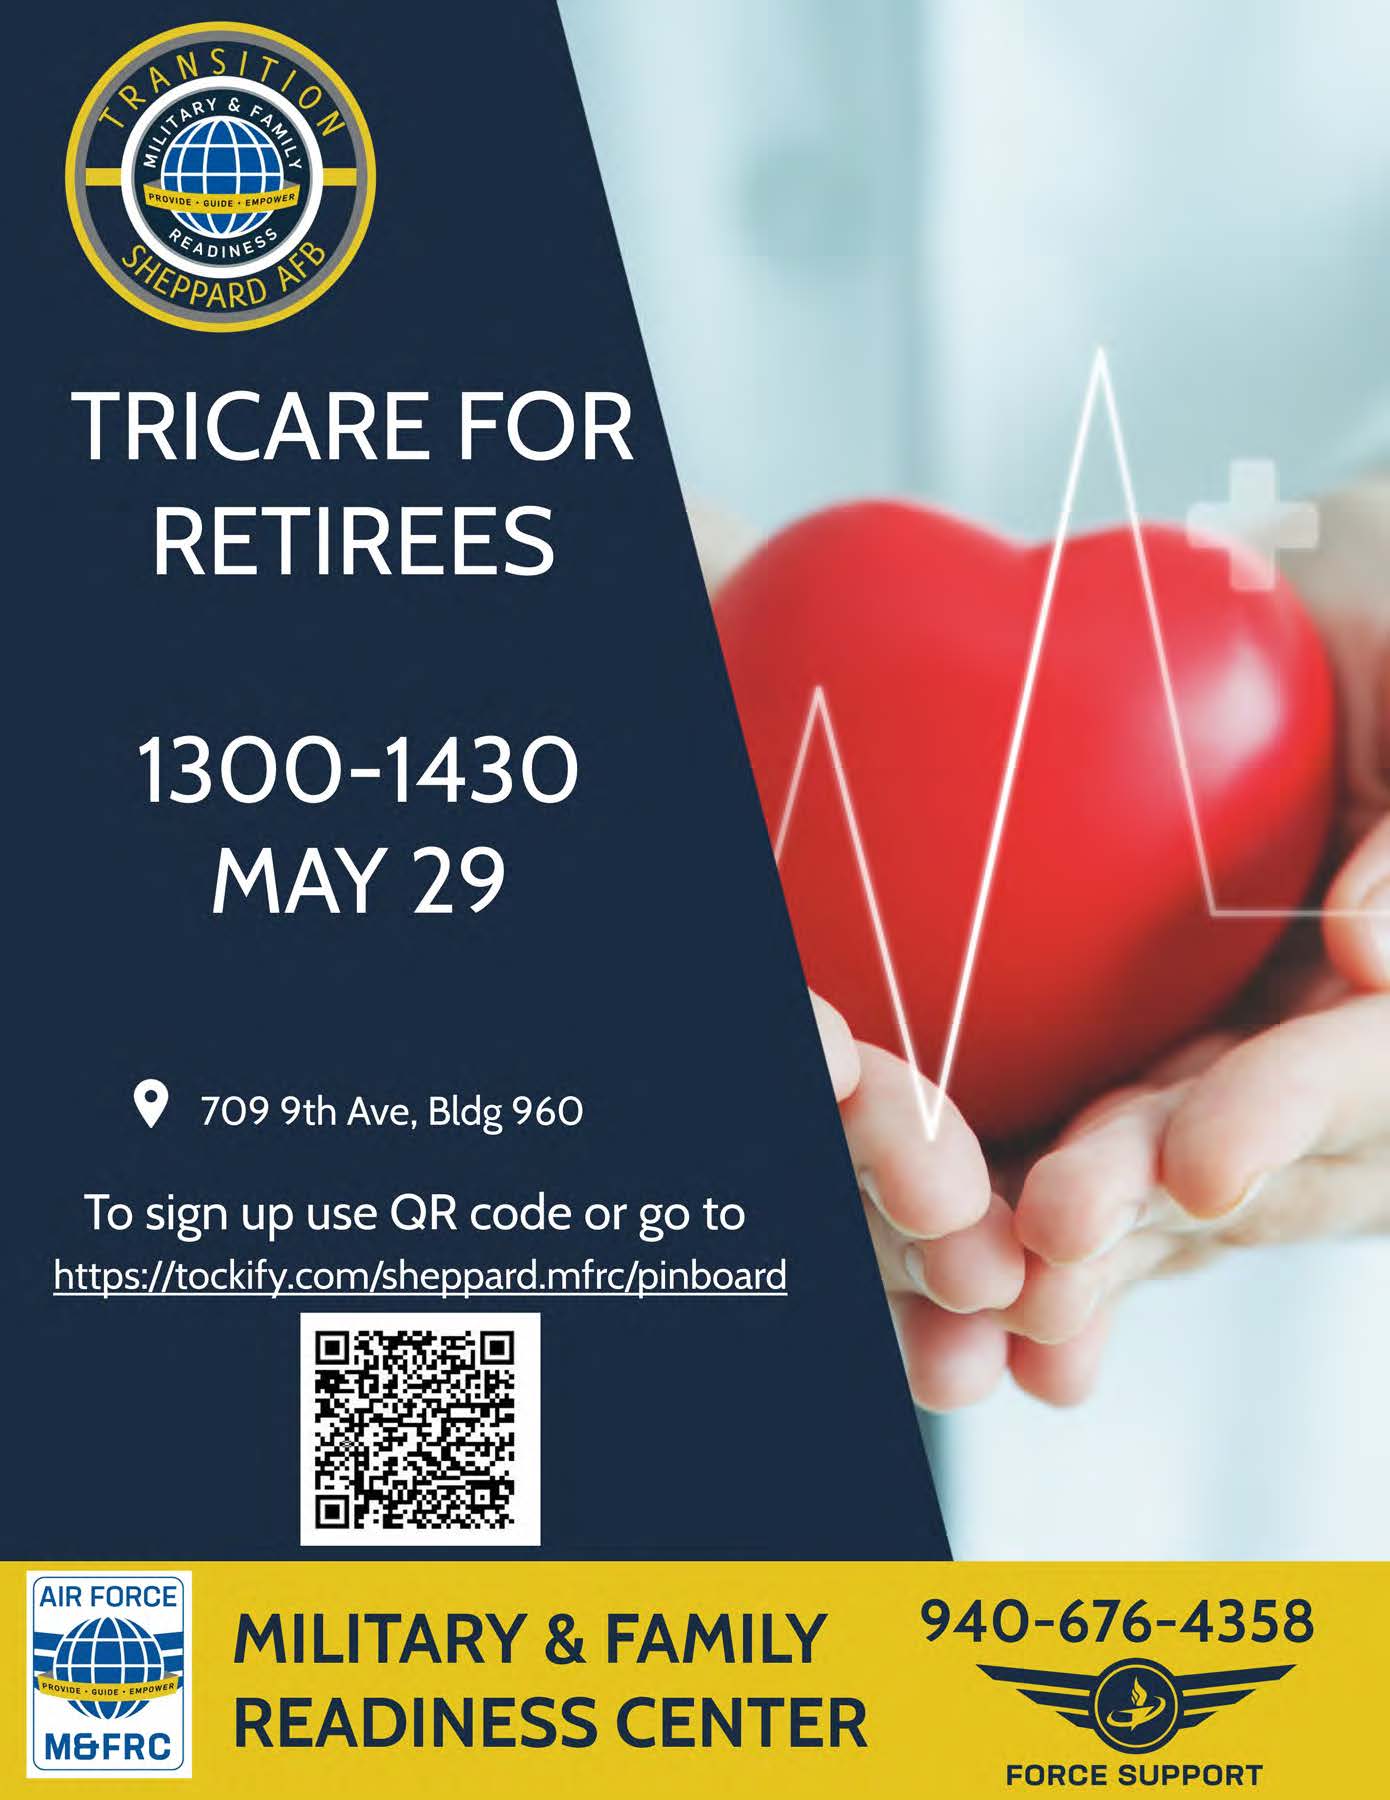 Tricare for Retirees